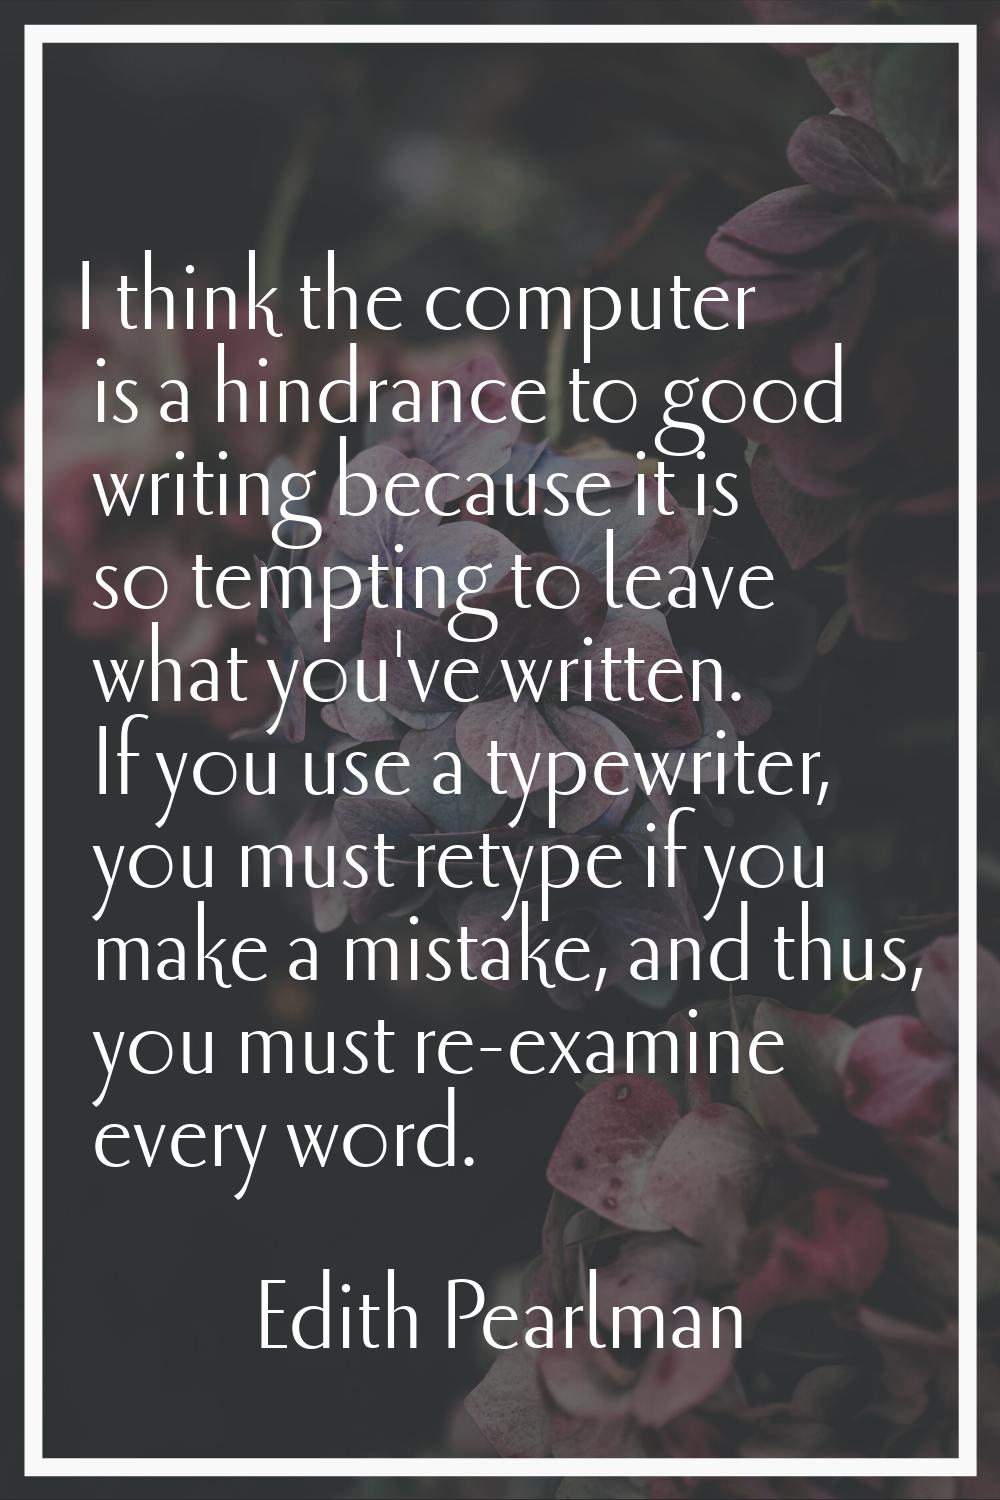 I think the computer is a hindrance to good writing because it is so tempting to leave what you've 